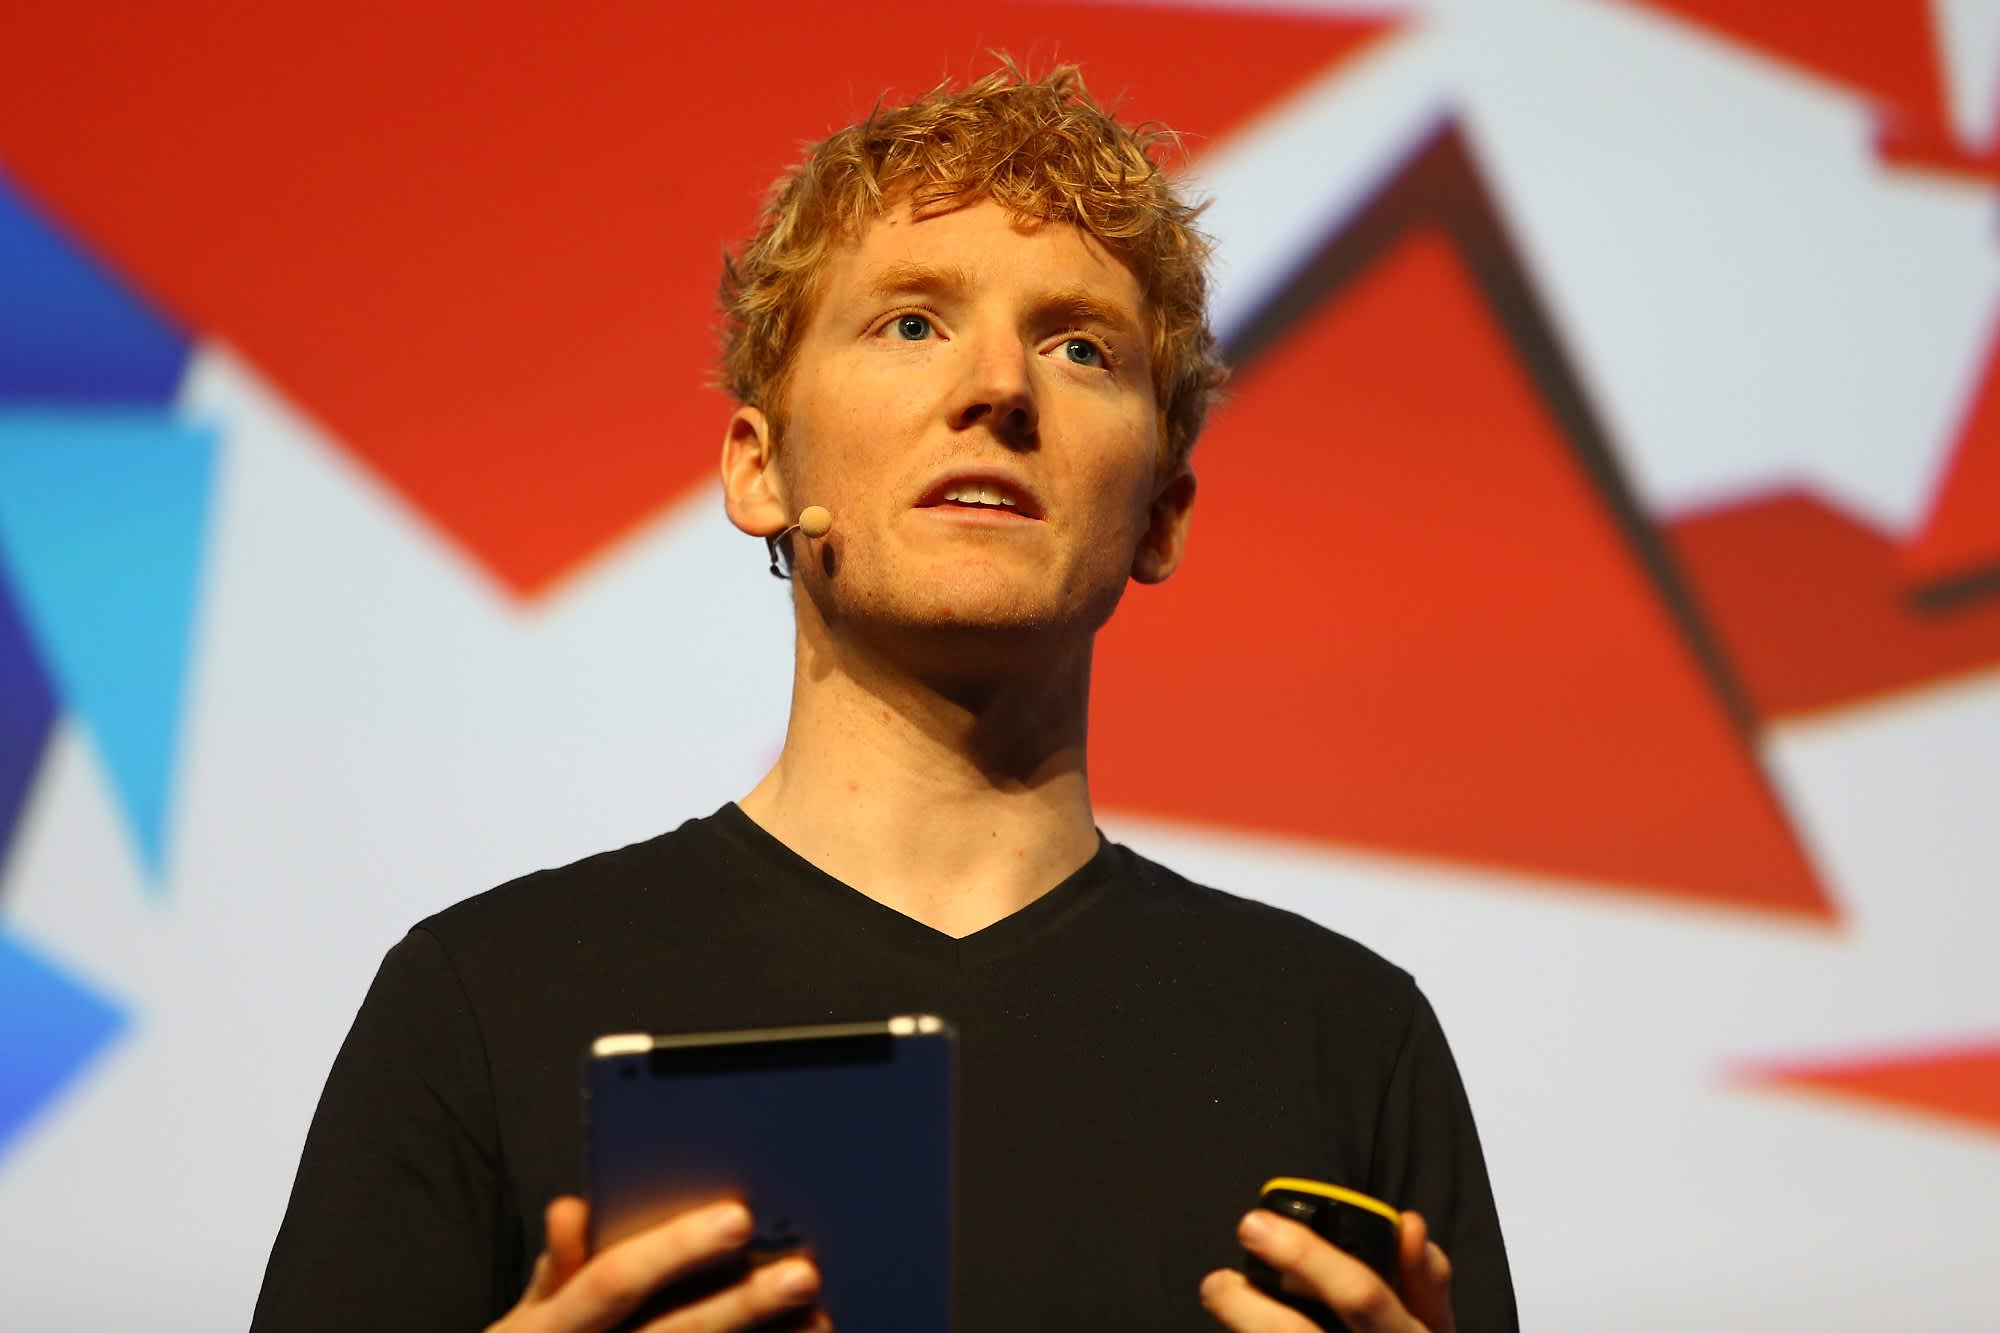 stripe lays off 14% of workers